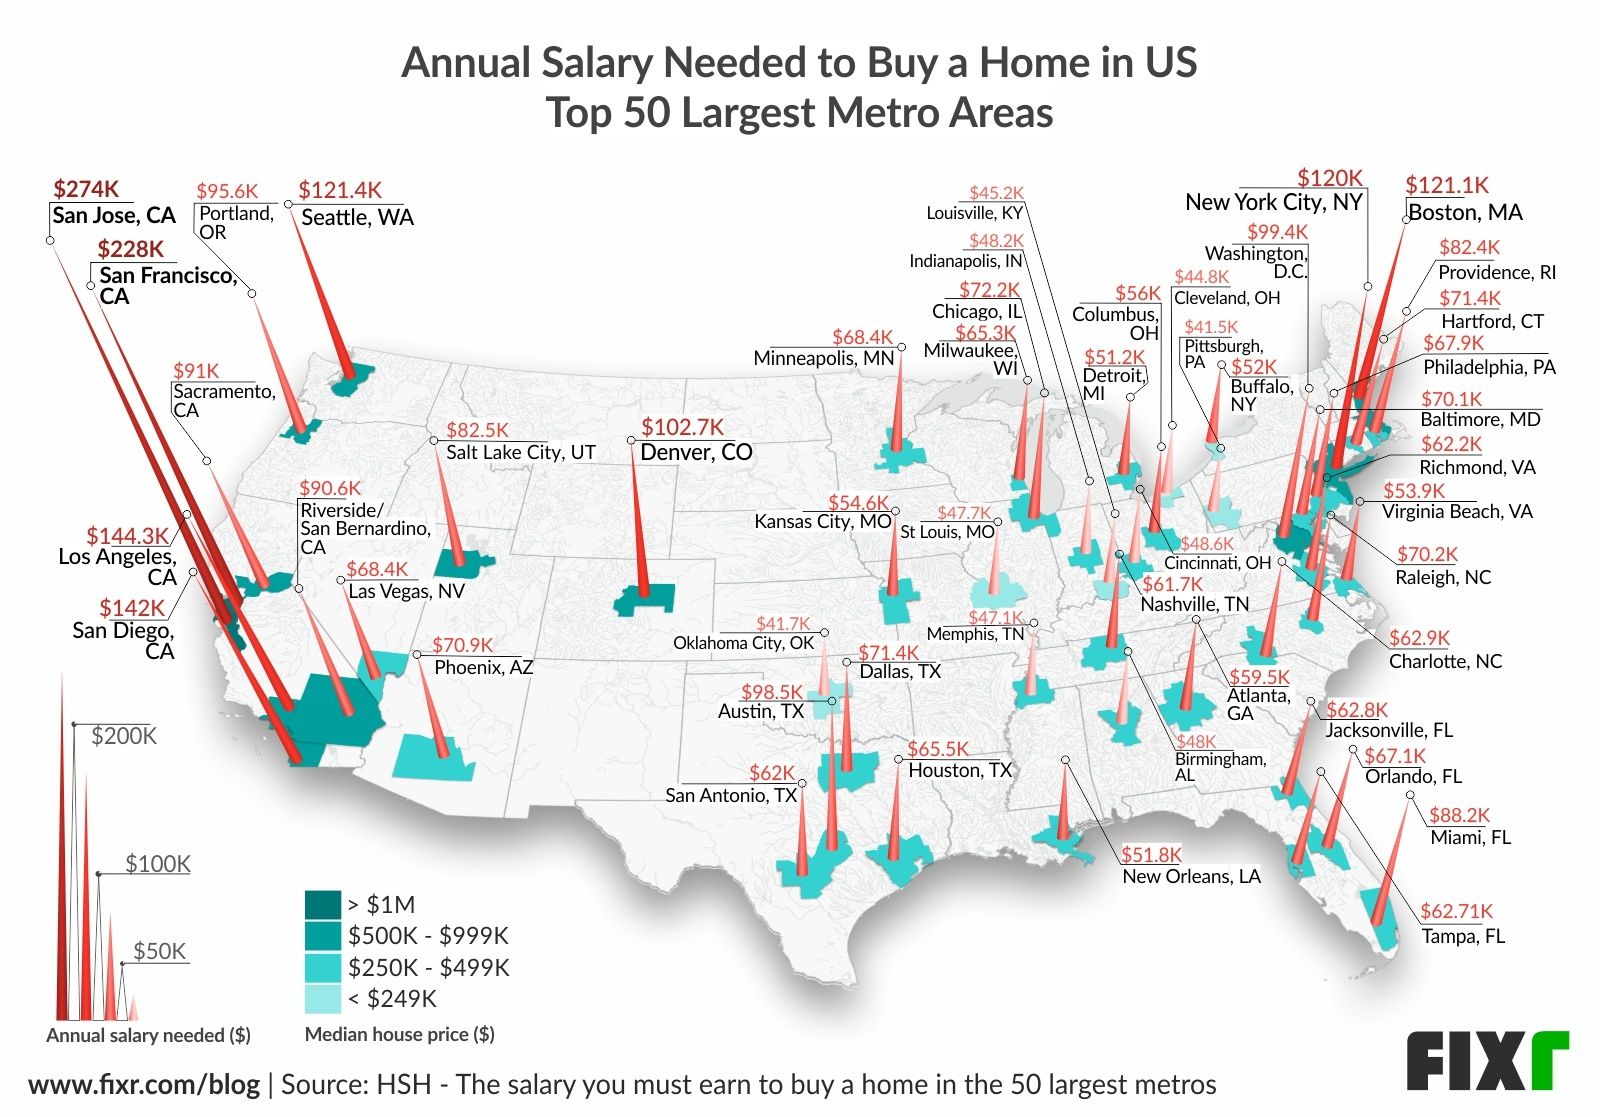 Median house prices and the necessary salary to afford to own them